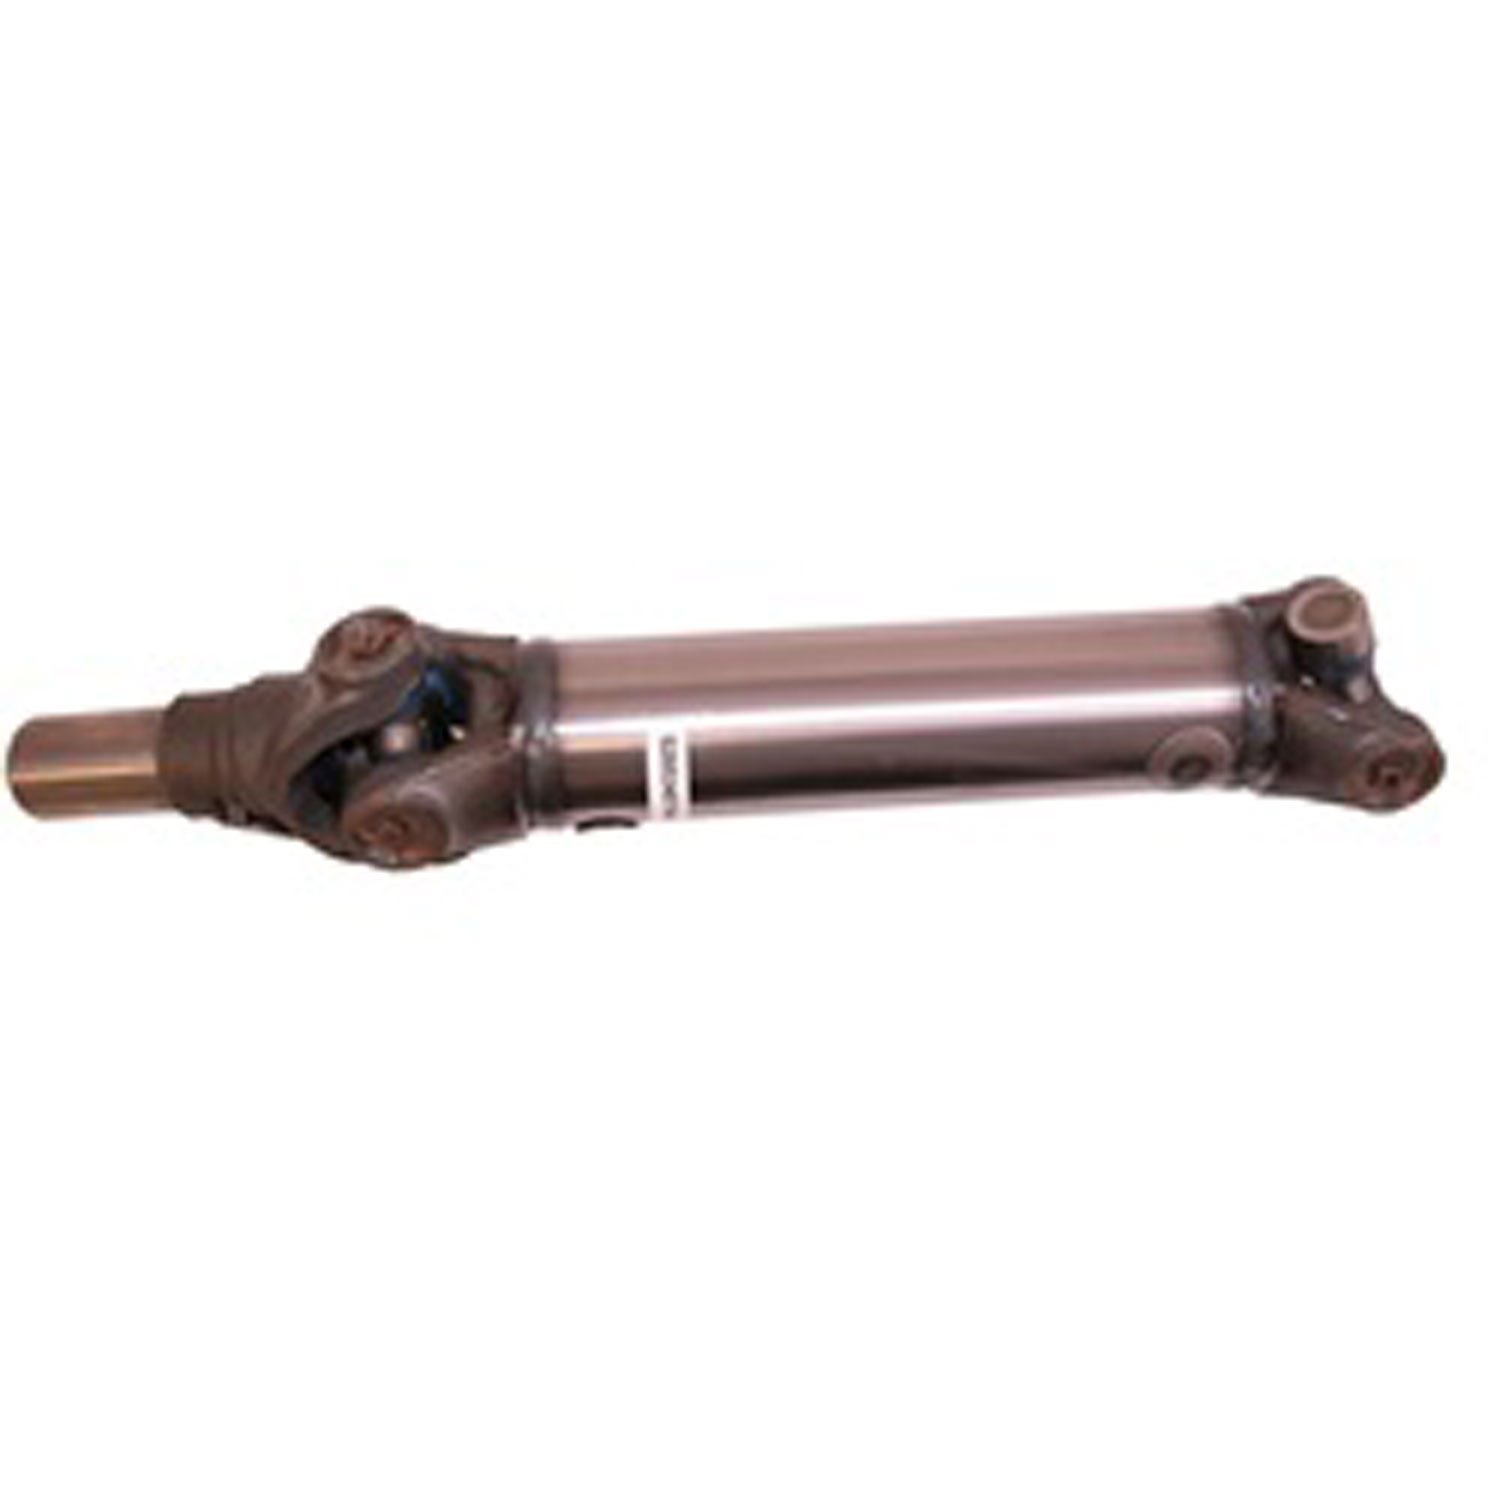 Stock replacement rear driveshaft from Omix-ADA, Fits 03-06 Jeep Wrangler TJ with 2.4 liter